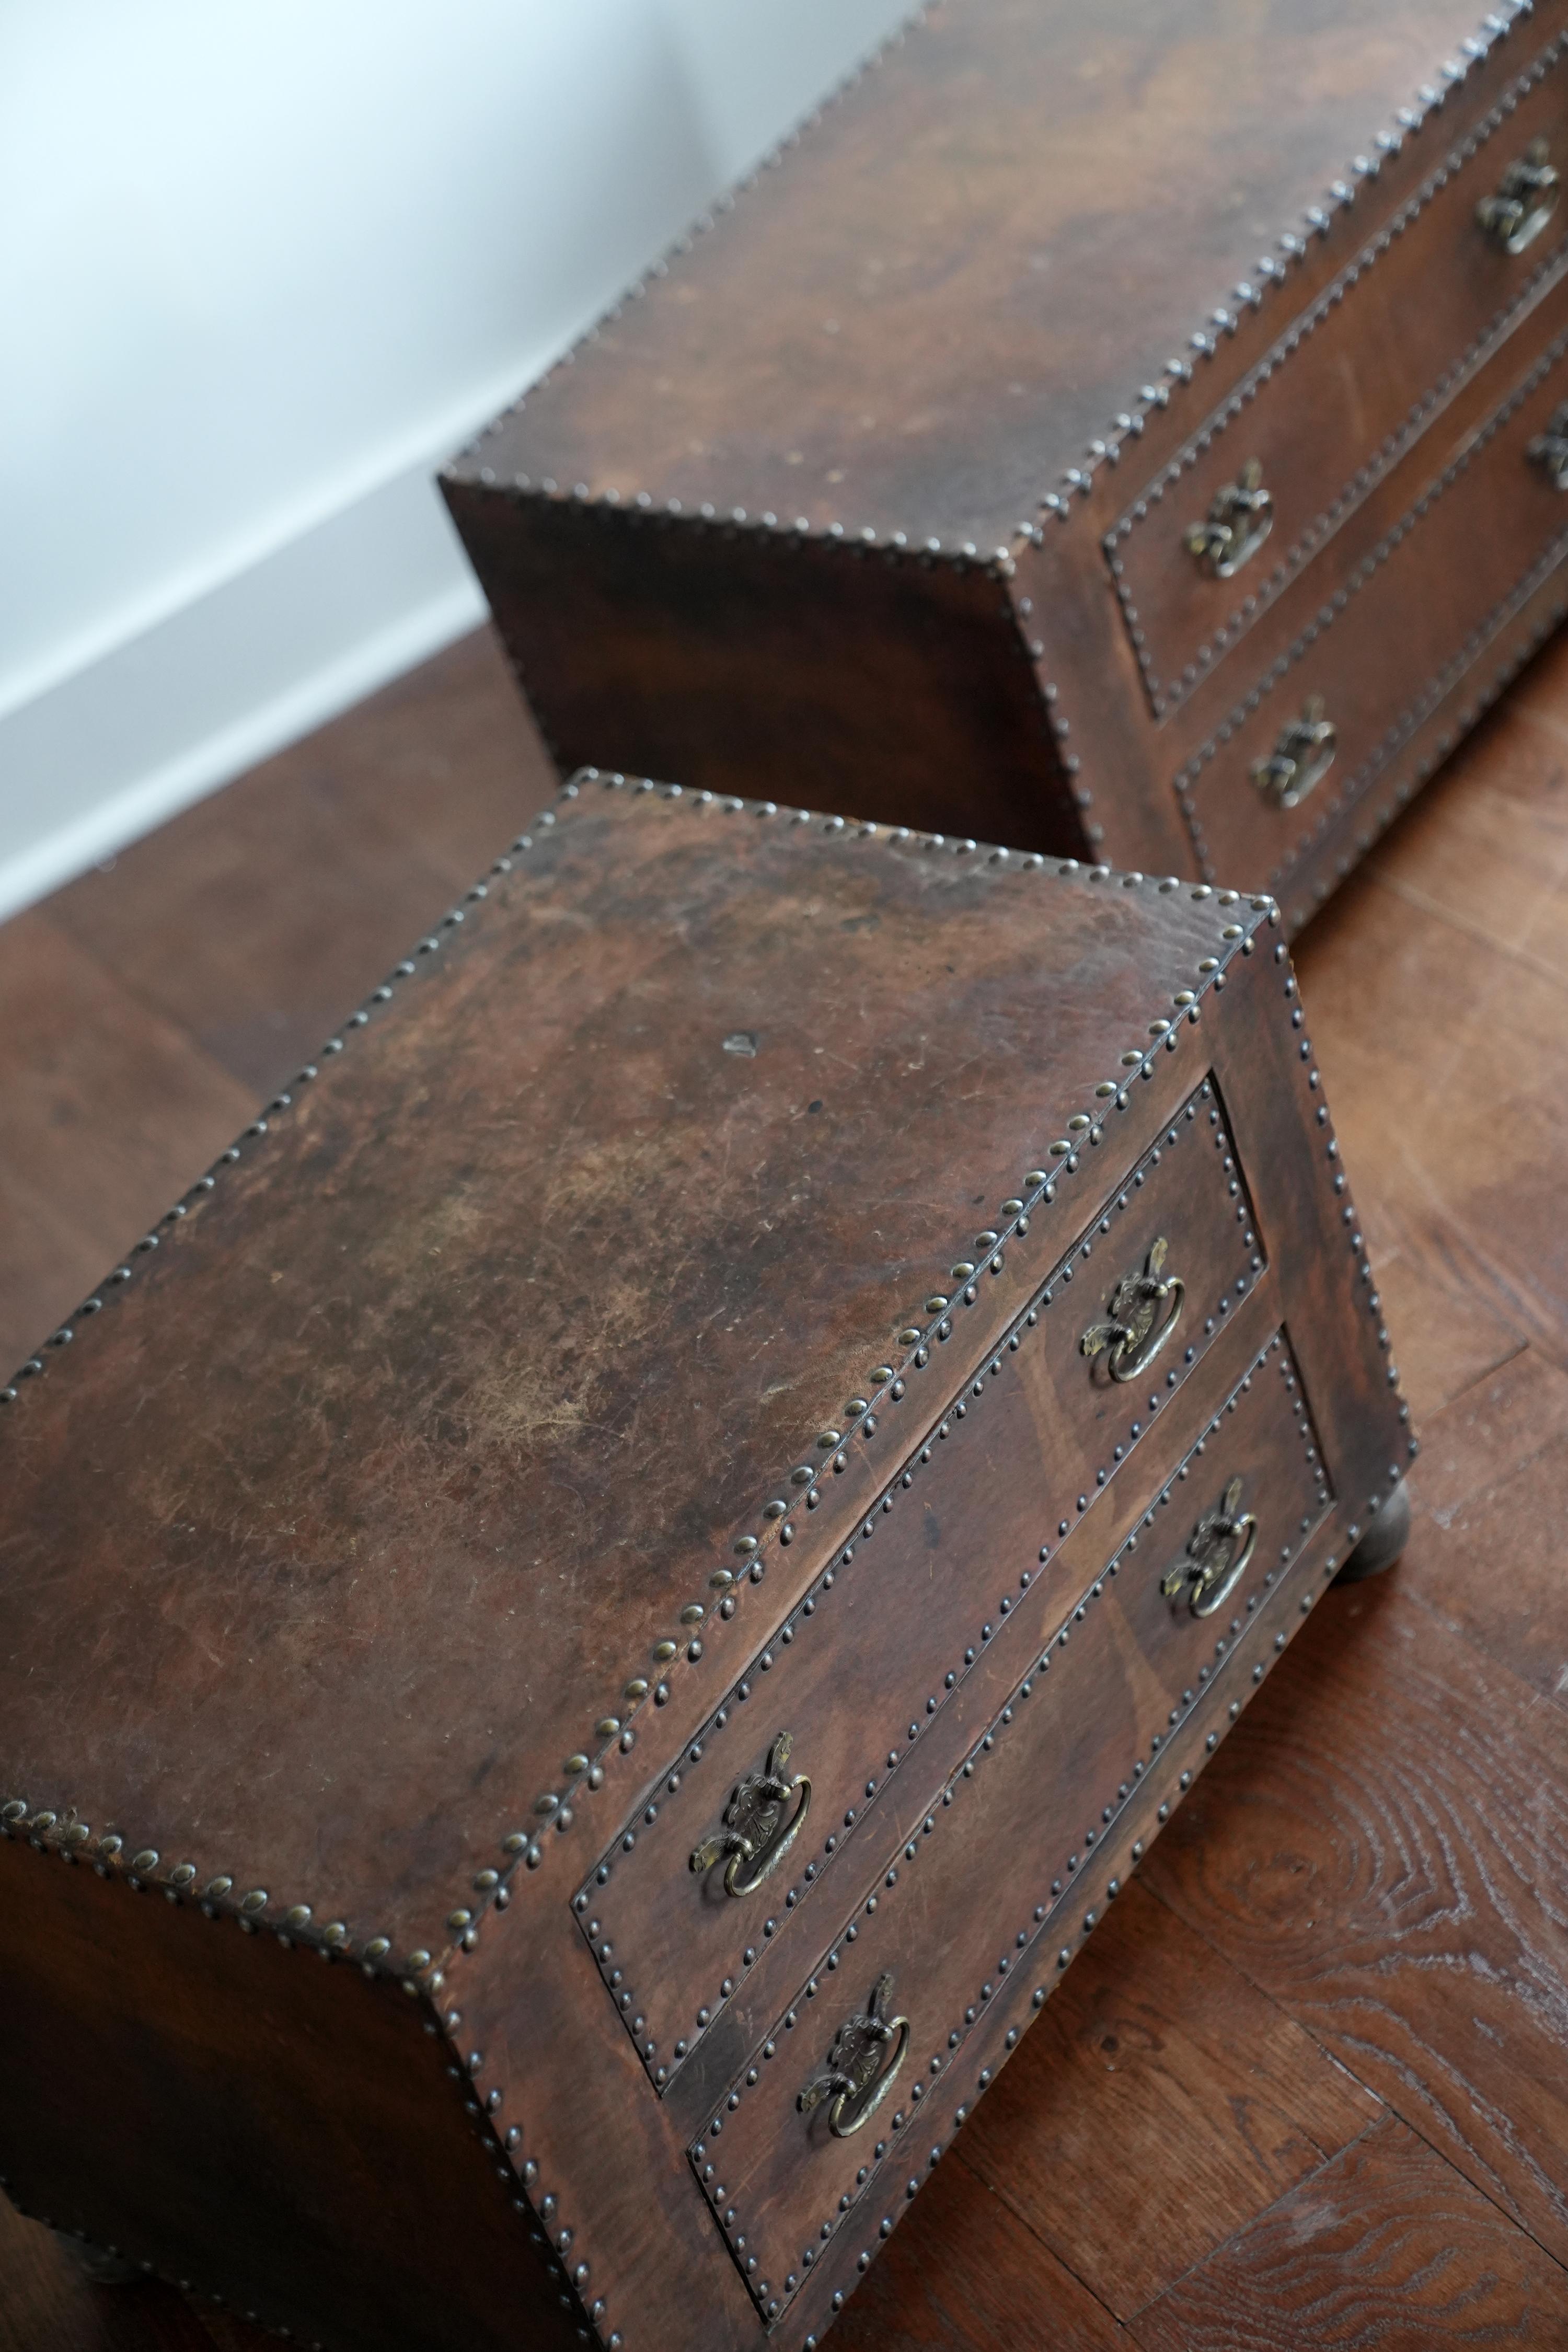 Leather Studded leather clad chests